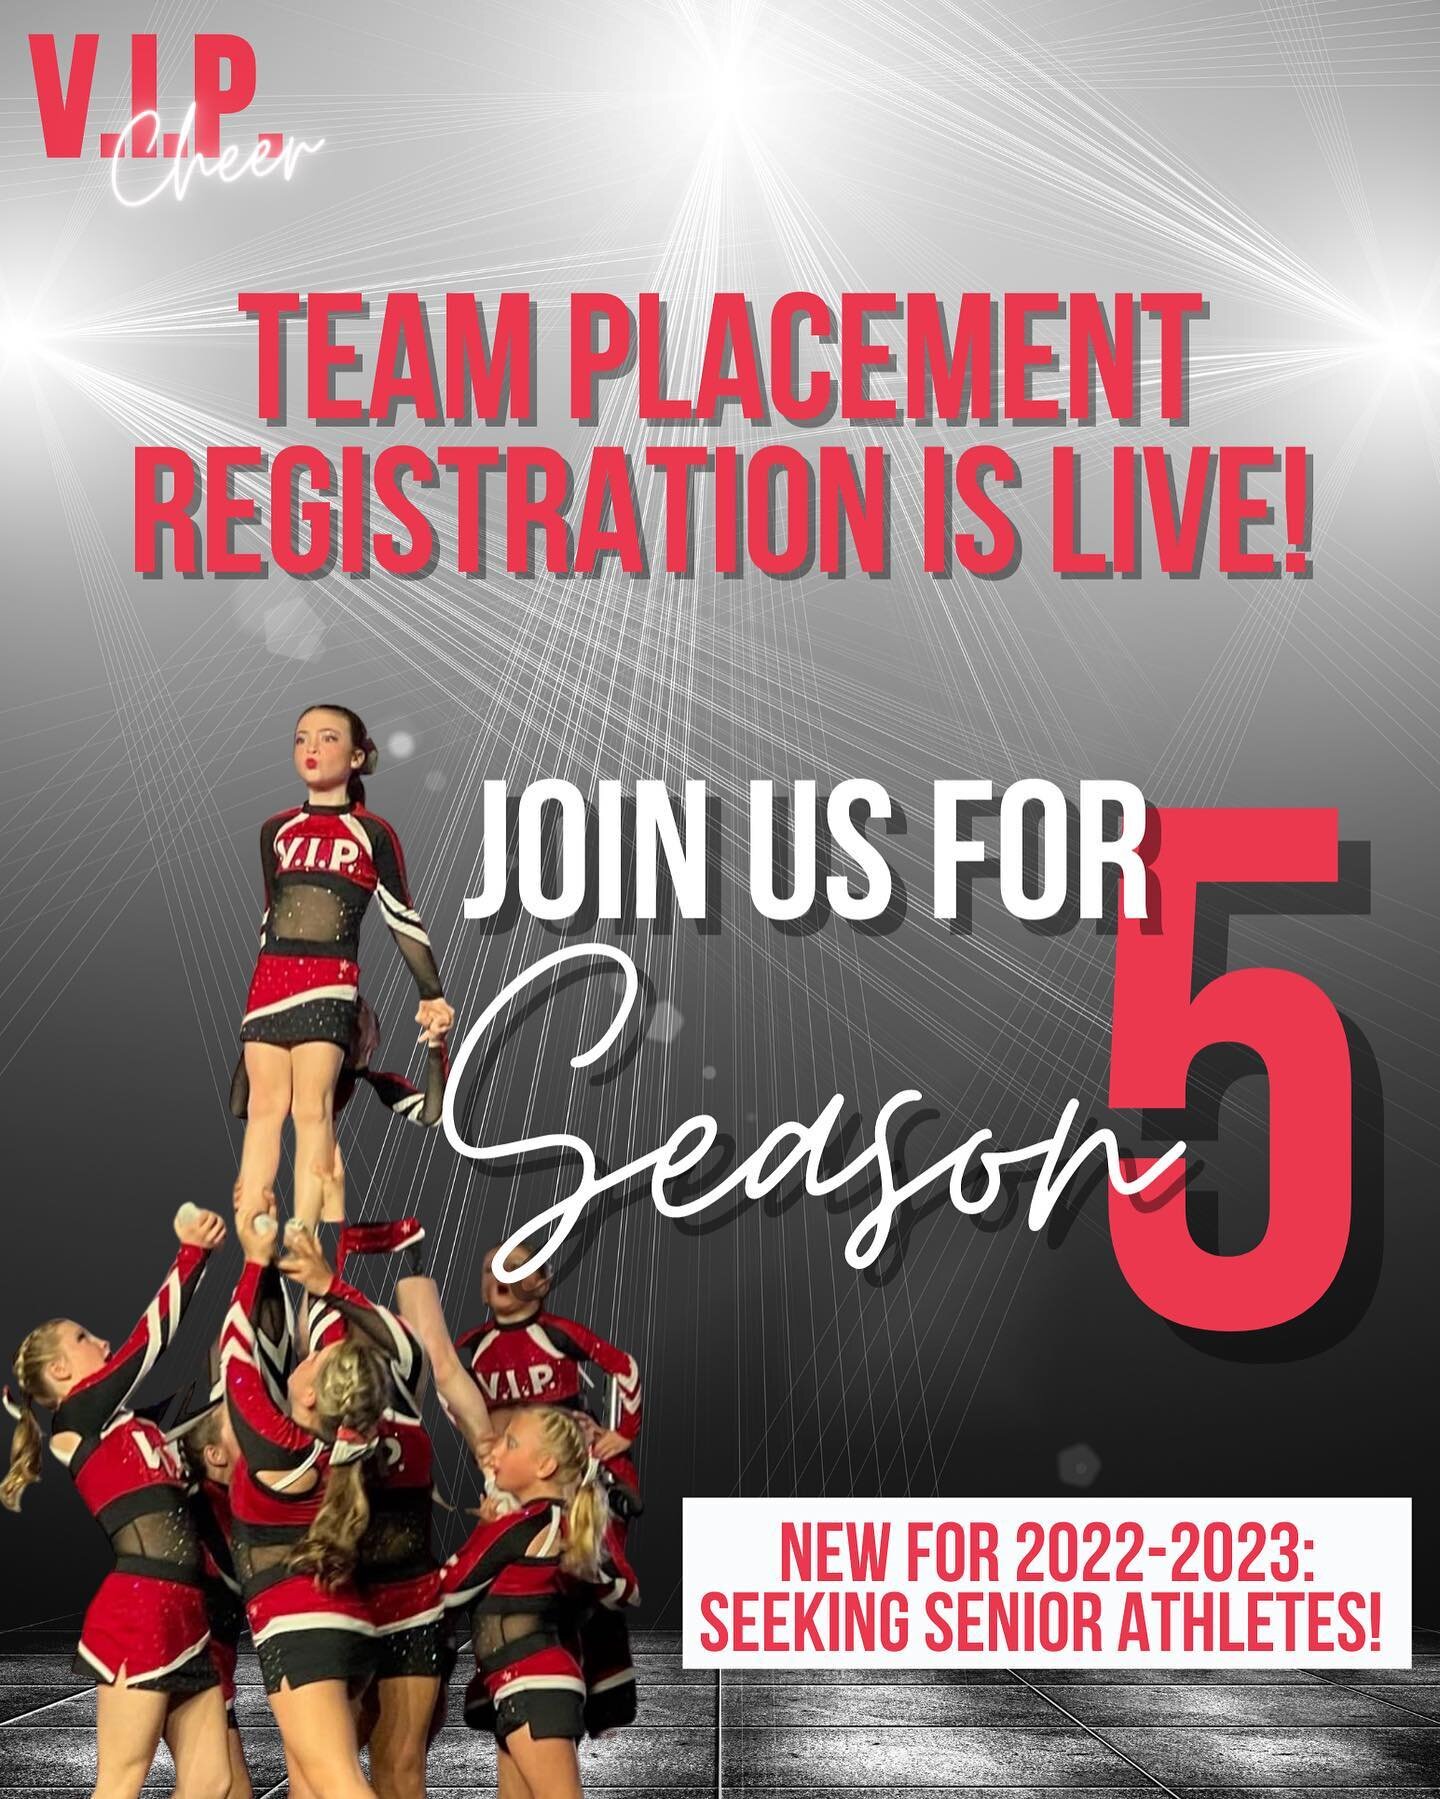 🚨REGISTRATION IS LIVE!🚨

Come join the V.I.P. team for the 2022-2023 season! Team placements are for athletes ages 5-18, both experienced and beginners, who are interested in our prep and elite teams. 

New for Season 5: seeking Senior athletes to 